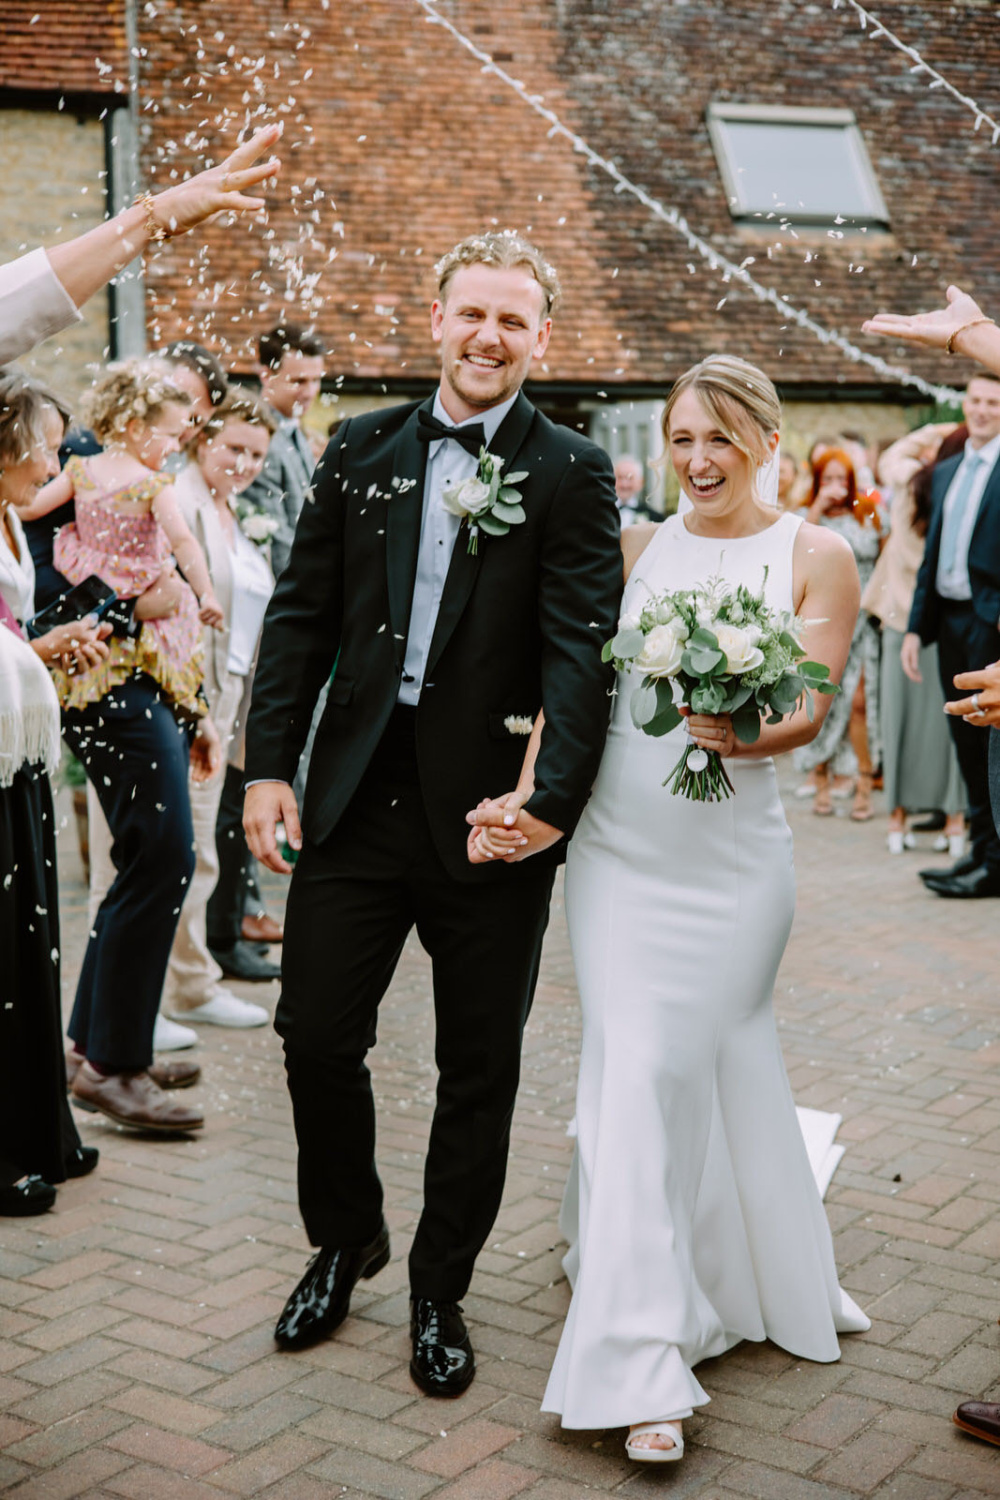 A bride and groom walking down the aisle with confetti thrown at them at tha front of the Stratton court Barn at their wedding.